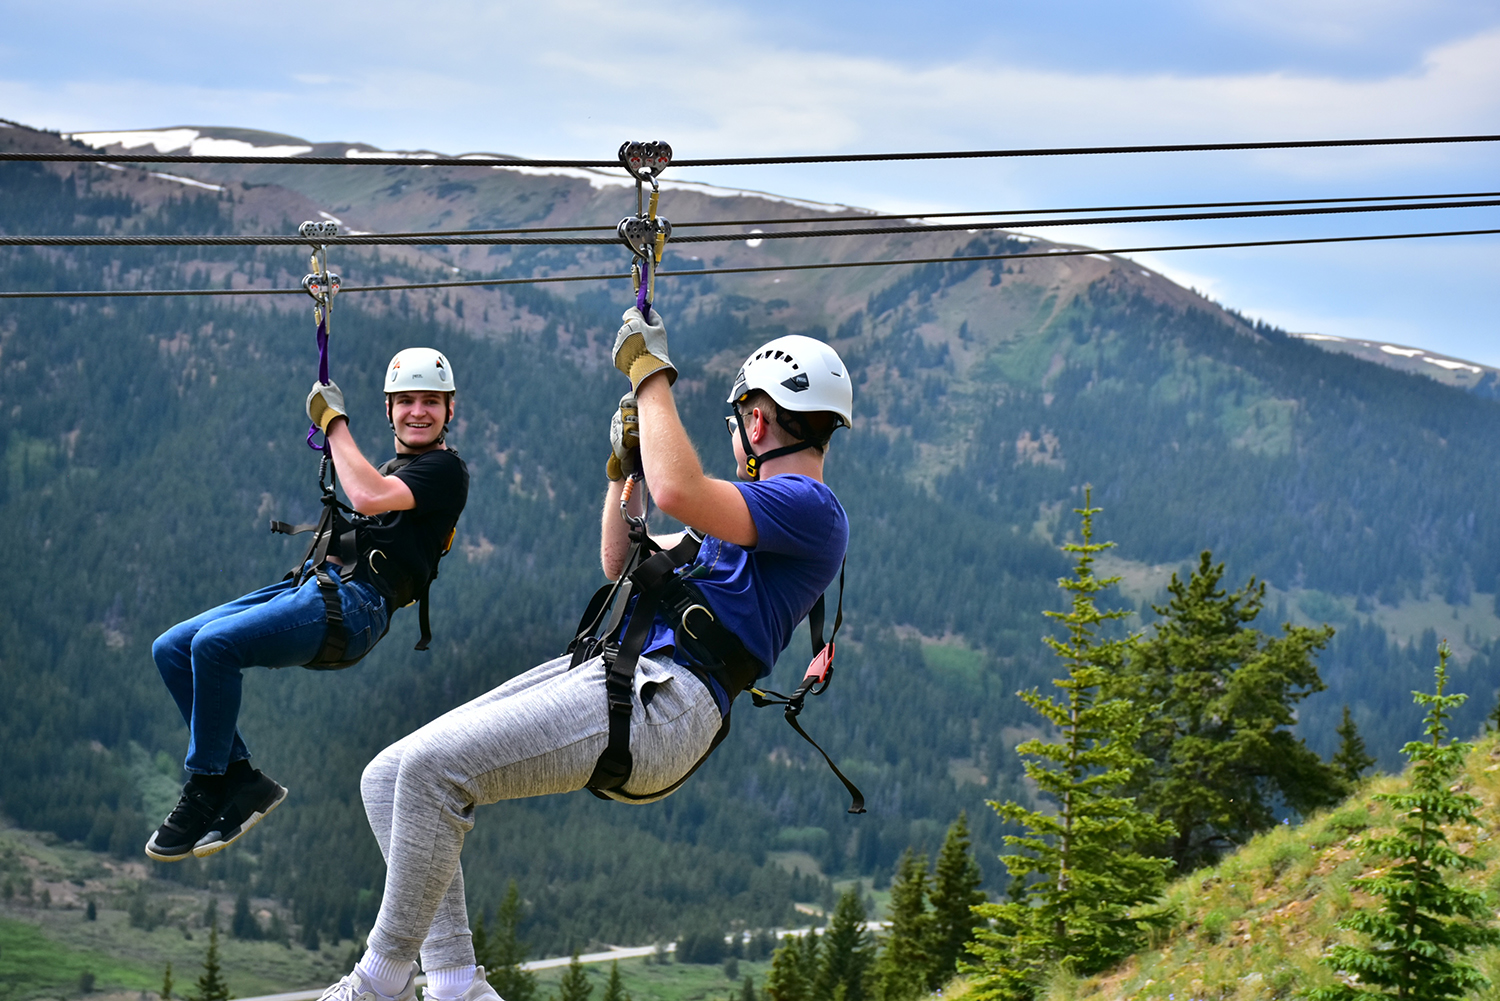 A pair of young men zooming down a zipline against a background of forested mountains.